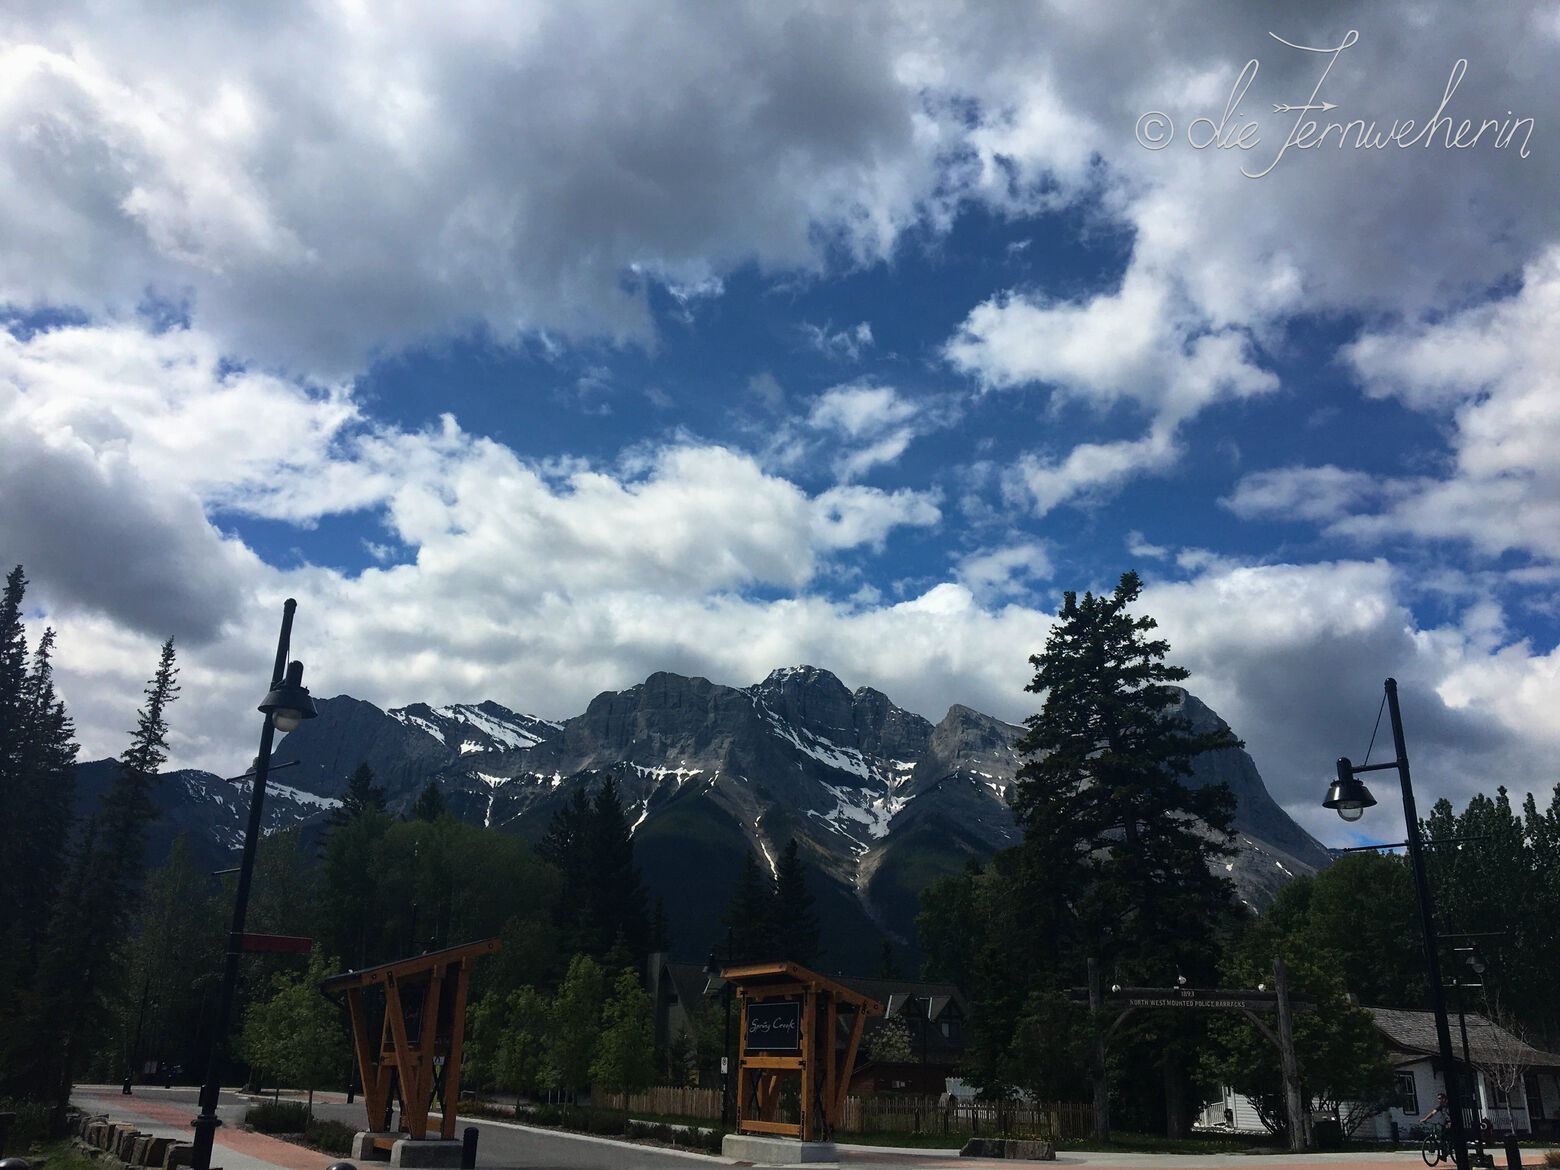 The views of the mountains from downtown Canmore, Alberta.